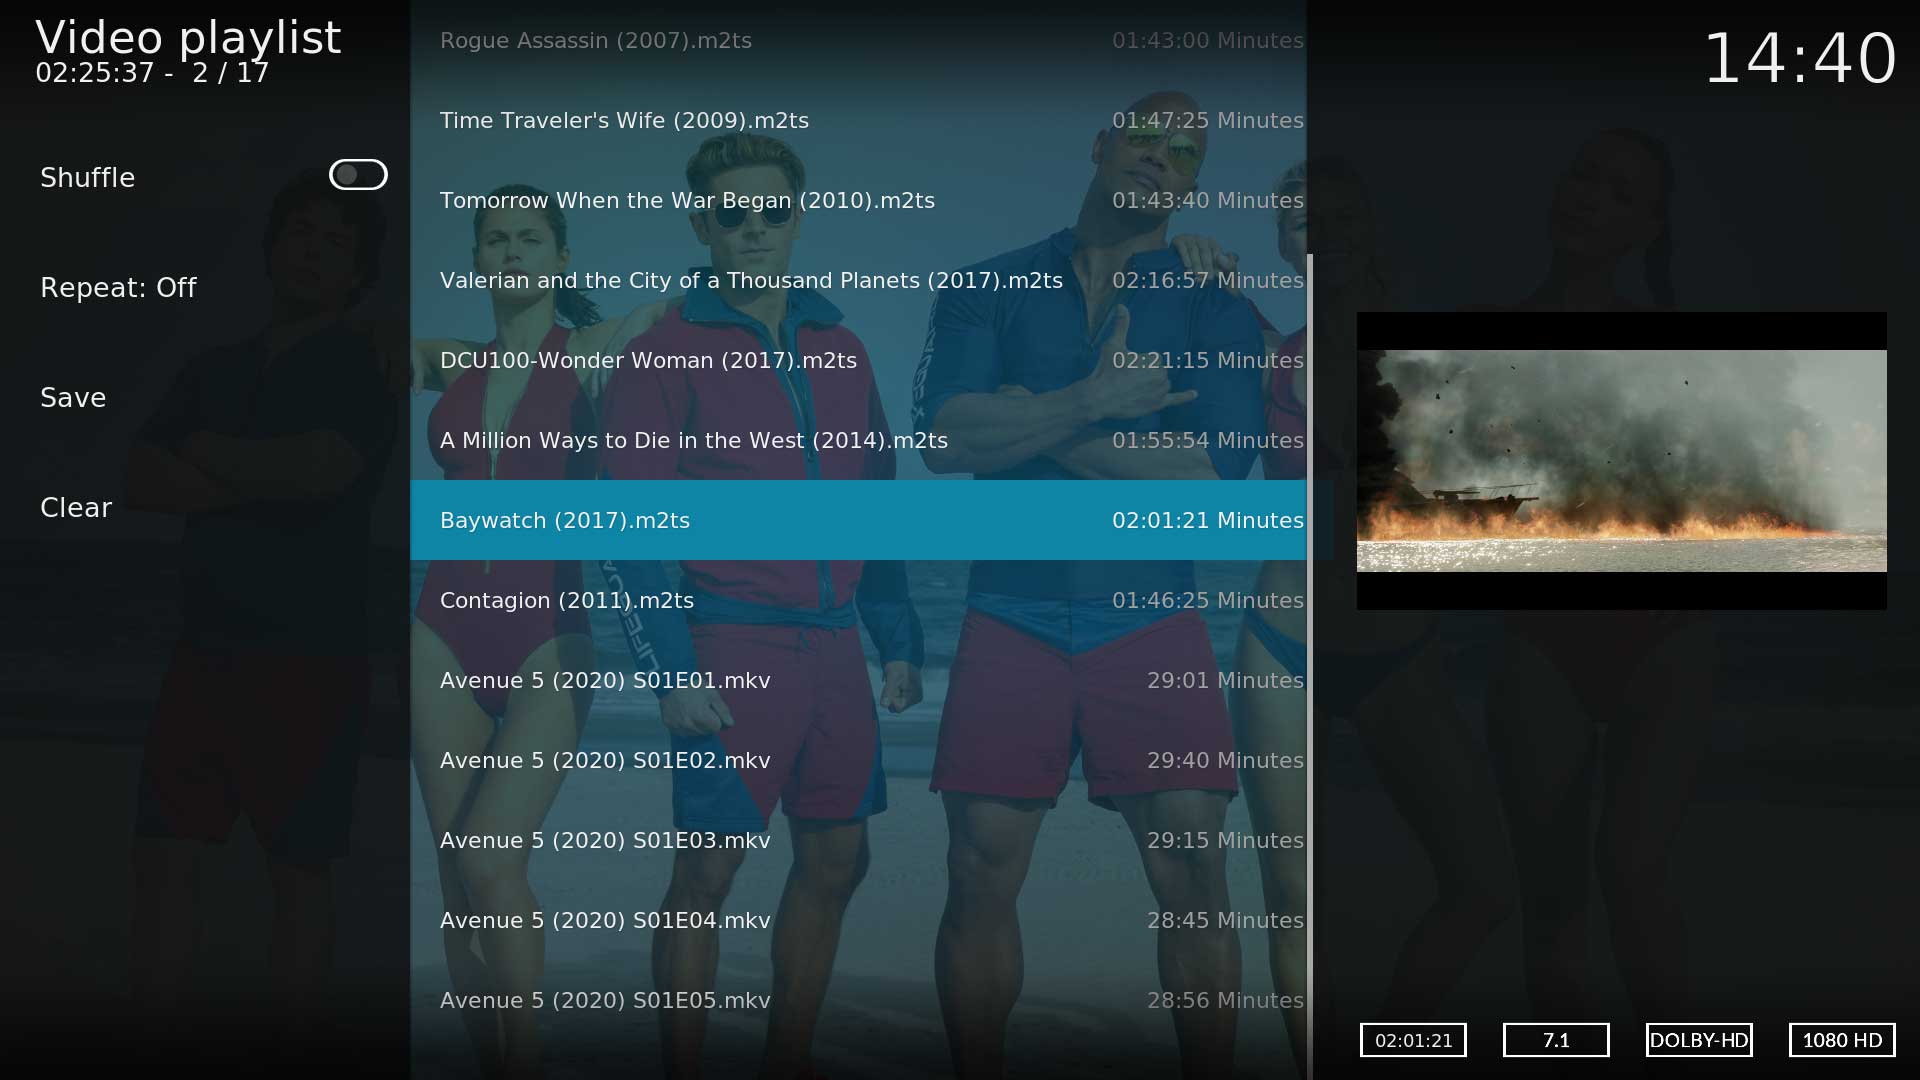 Image 5- The playlist view. Note the combined Movies and Episodes.